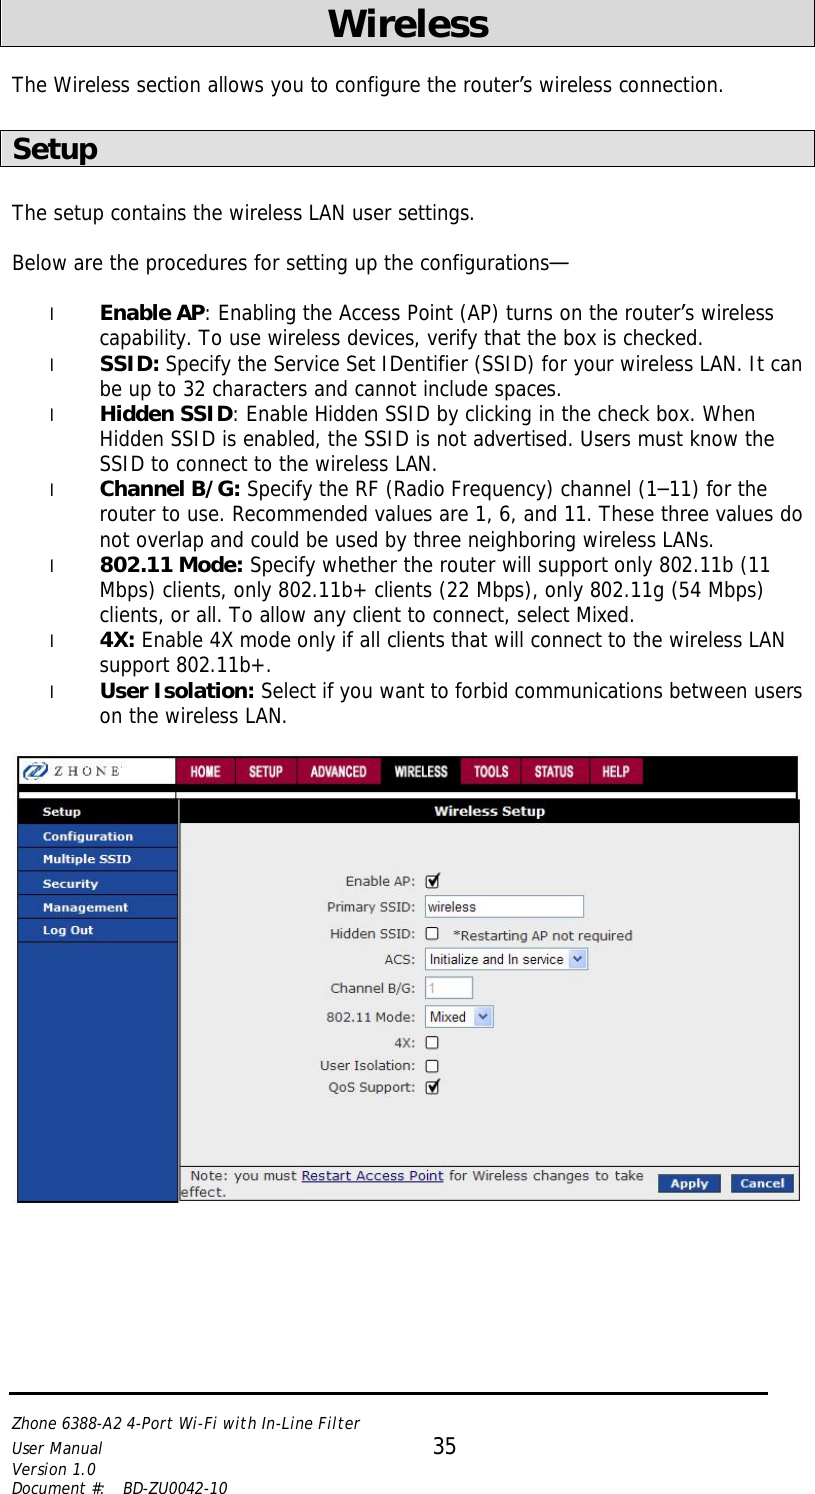   Zhone 6388-A2 4-Port Wi-Fi with In-Line Filter User Manual 35 Version 1.0 Document #:  BD-ZU0042-10    Wireless   The Wireless section allows you to configure the router’s wireless connection.  Setup  The setup contains the wireless LAN user settings.  Below are the procedures for setting up the configurations—  l Enable AP: Enabling the Access Point (AP) turns on the router’s wireless capability. To use wireless devices, verify that the box is checked.  l SSID: Specify the Service Set IDentifier (SSID) for your wireless LAN. It can be up to 32 characters and cannot include spaces. l Hidden SSID: Enable Hidden SSID by clicking in the check box. When Hidden SSID is enabled, the SSID is not advertised. Users must know the SSID to connect to the wireless LAN. l Channel B/G: Specify the RF (Radio Frequency) channel (1–11) for the router to use. Recommended values are 1, 6, and 11. These three values do not overlap and could be used by three neighboring wireless LANs. l 802.11 Mode: Specify whether the router will support only 802.11b (11 Mbps) clients, only 802.11b+ clients (22 Mbps), only 802.11g (54 Mbps) clients, or all. To allow any client to connect, select Mixed. l 4X: Enable 4X mode only if all clients that will connect to the wireless LAN support 802.11b+. l User Isolation: Select if you want to forbid communications between users on the wireless LAN.    